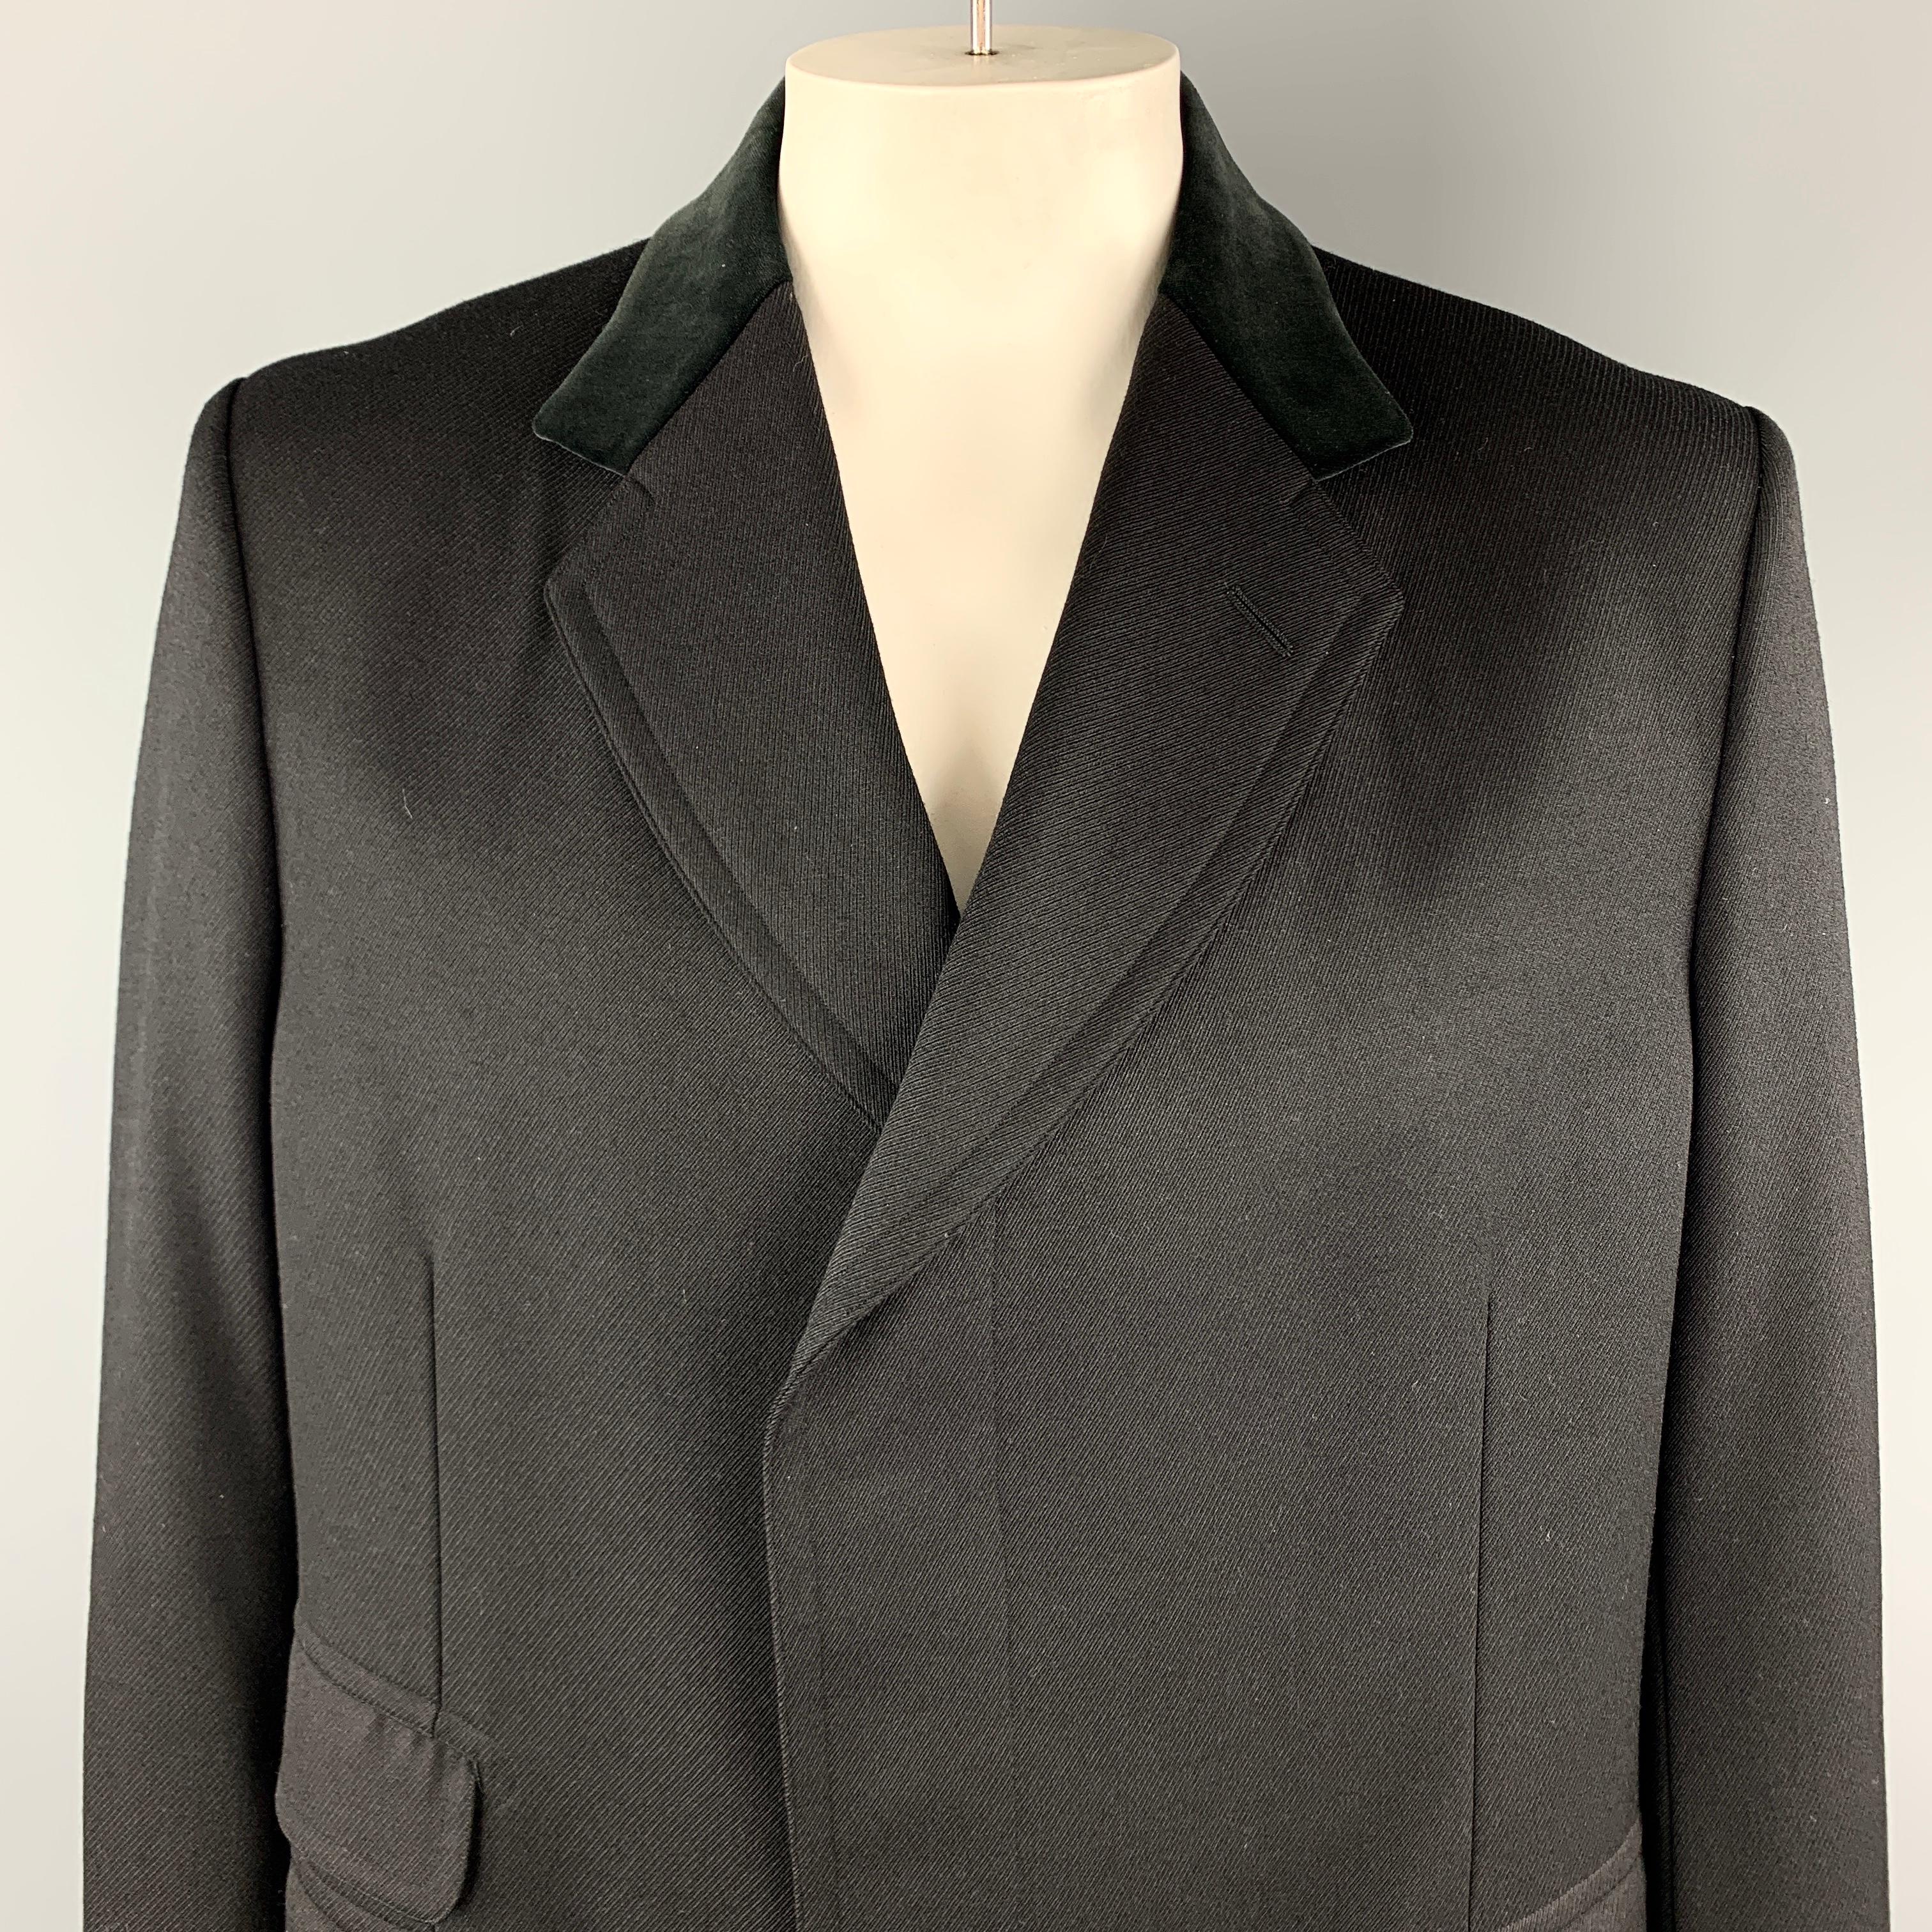 GUCCI Long Coat comes in a black solid wool material, with a velvet collar, hidden buttons at closure, single breasted, flap pockets, buttoned cuffs, and a single vent at back. Made in Switzerland. 

Excellent Pre-Owned Condition.
Marked: IT 56